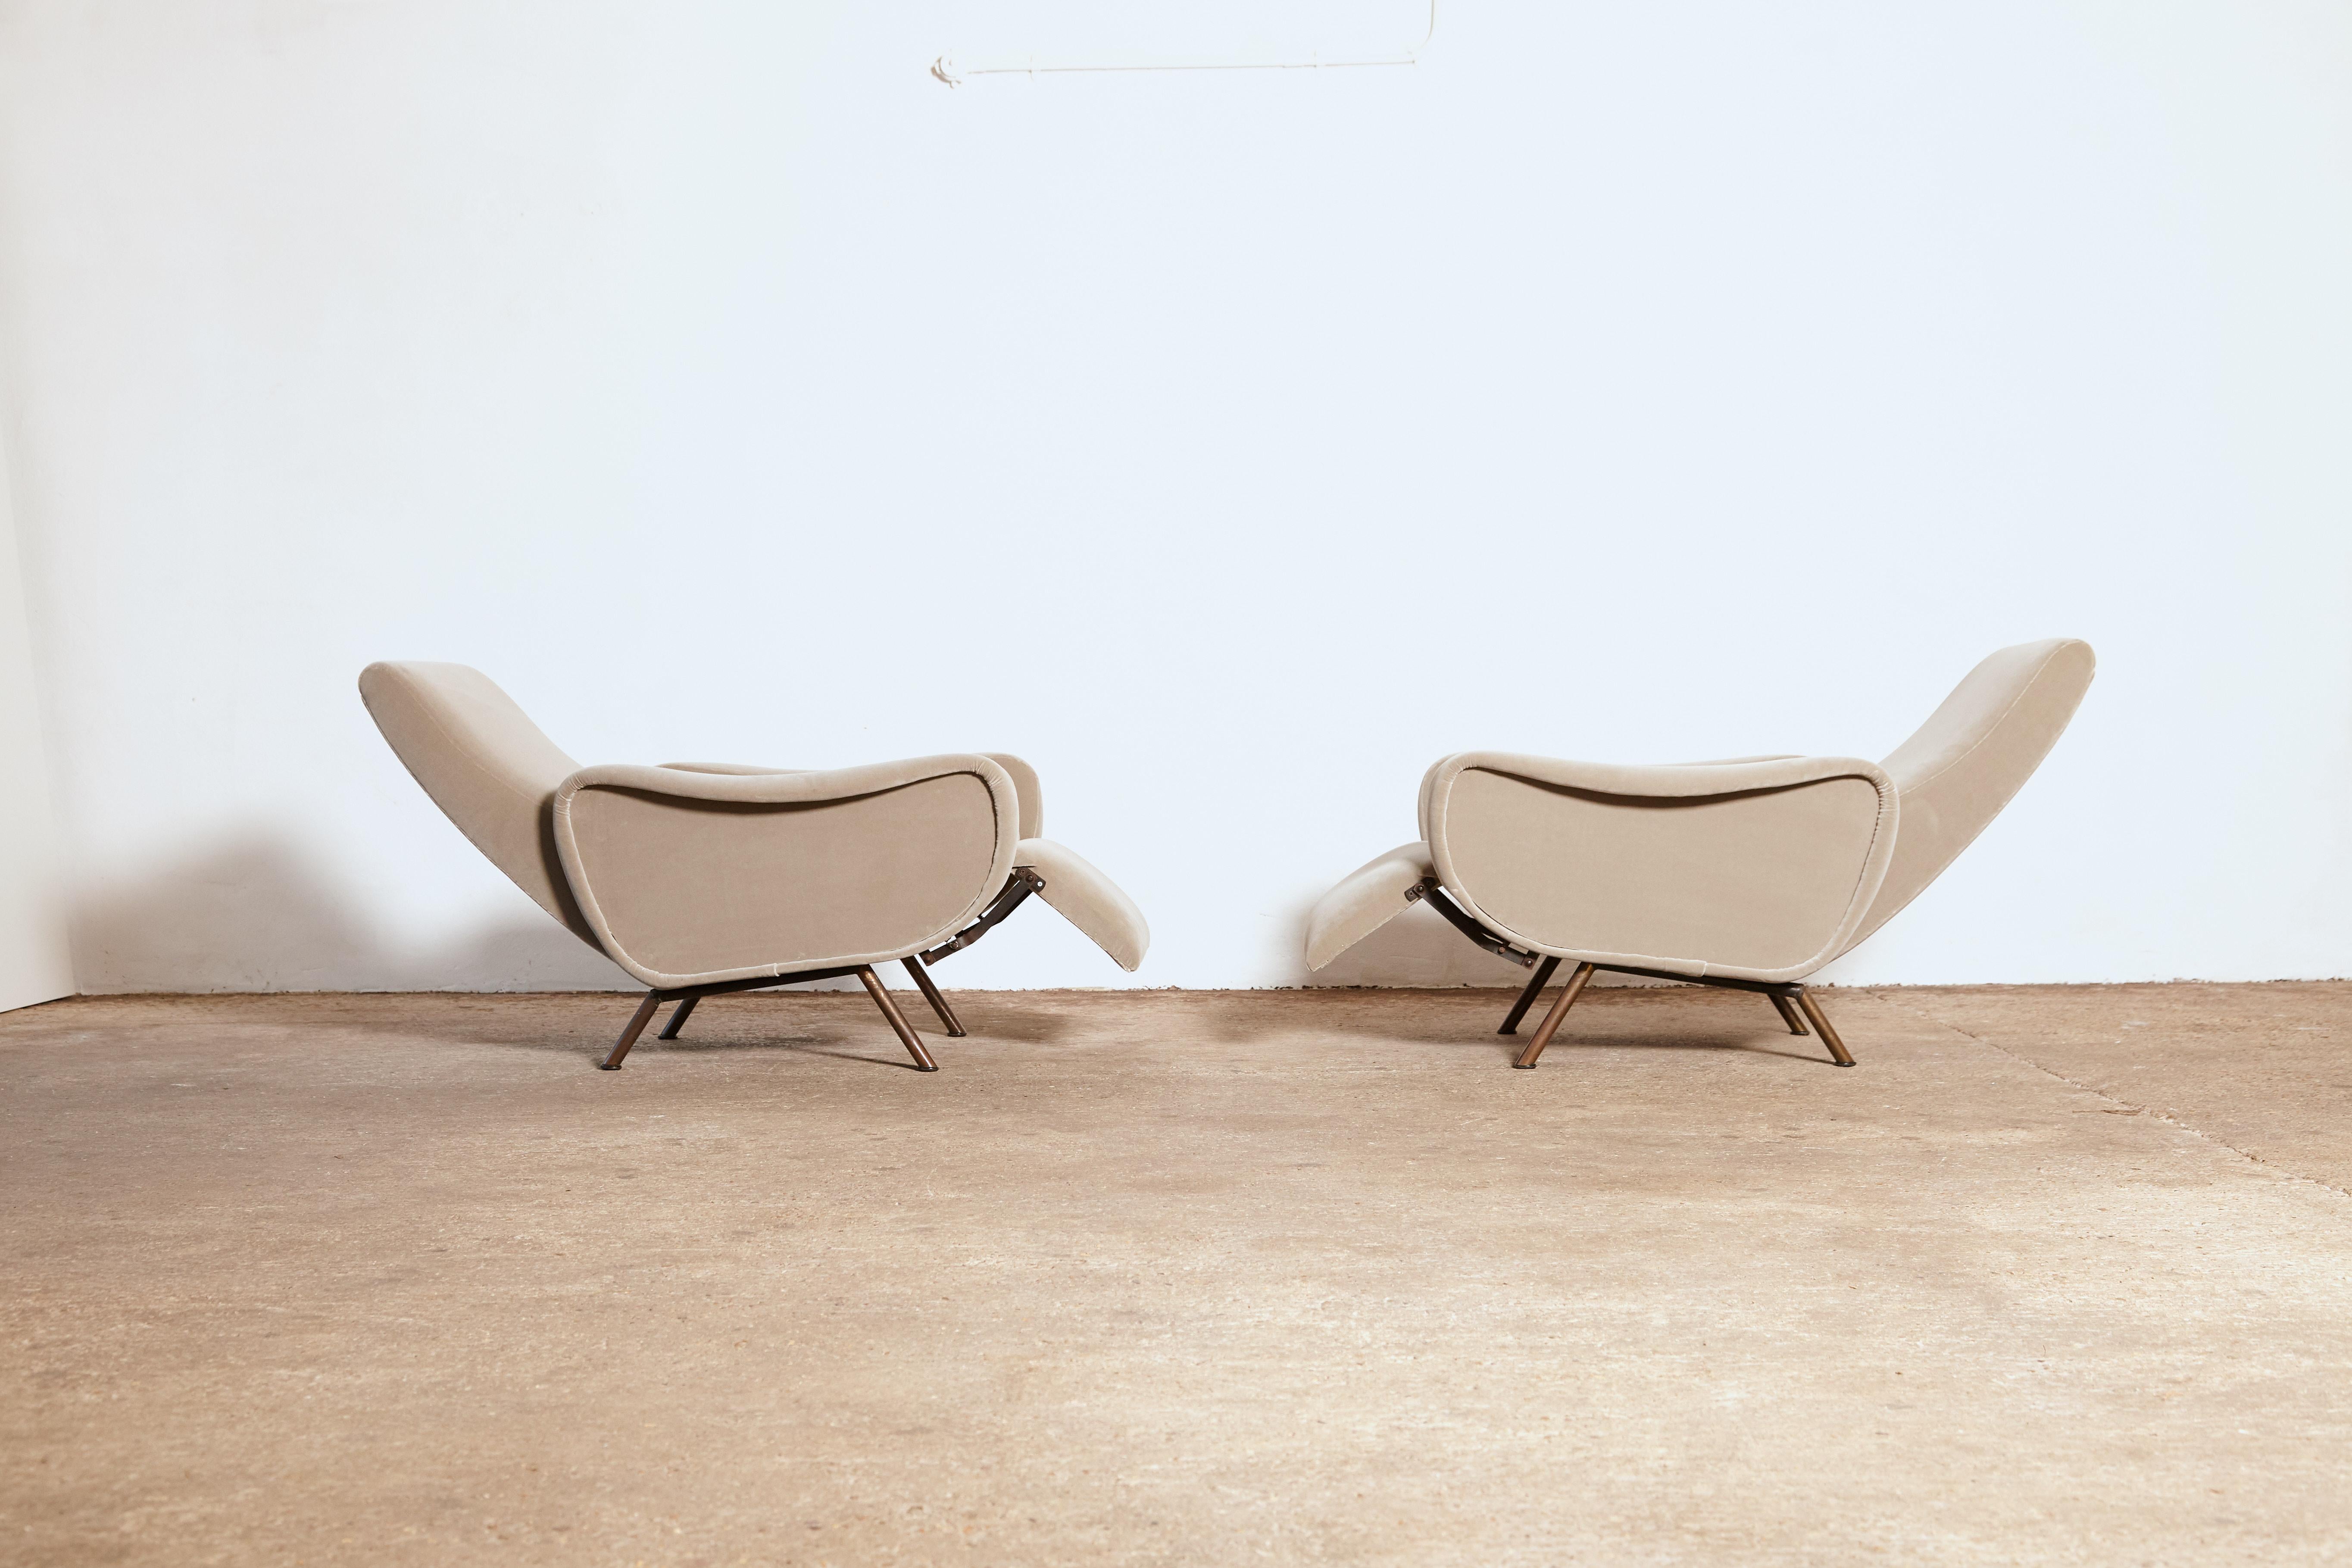 20th Century Rare Marco Zanuso Reclining Lady Chairs, Italy, 1960s, reupholstered in COM